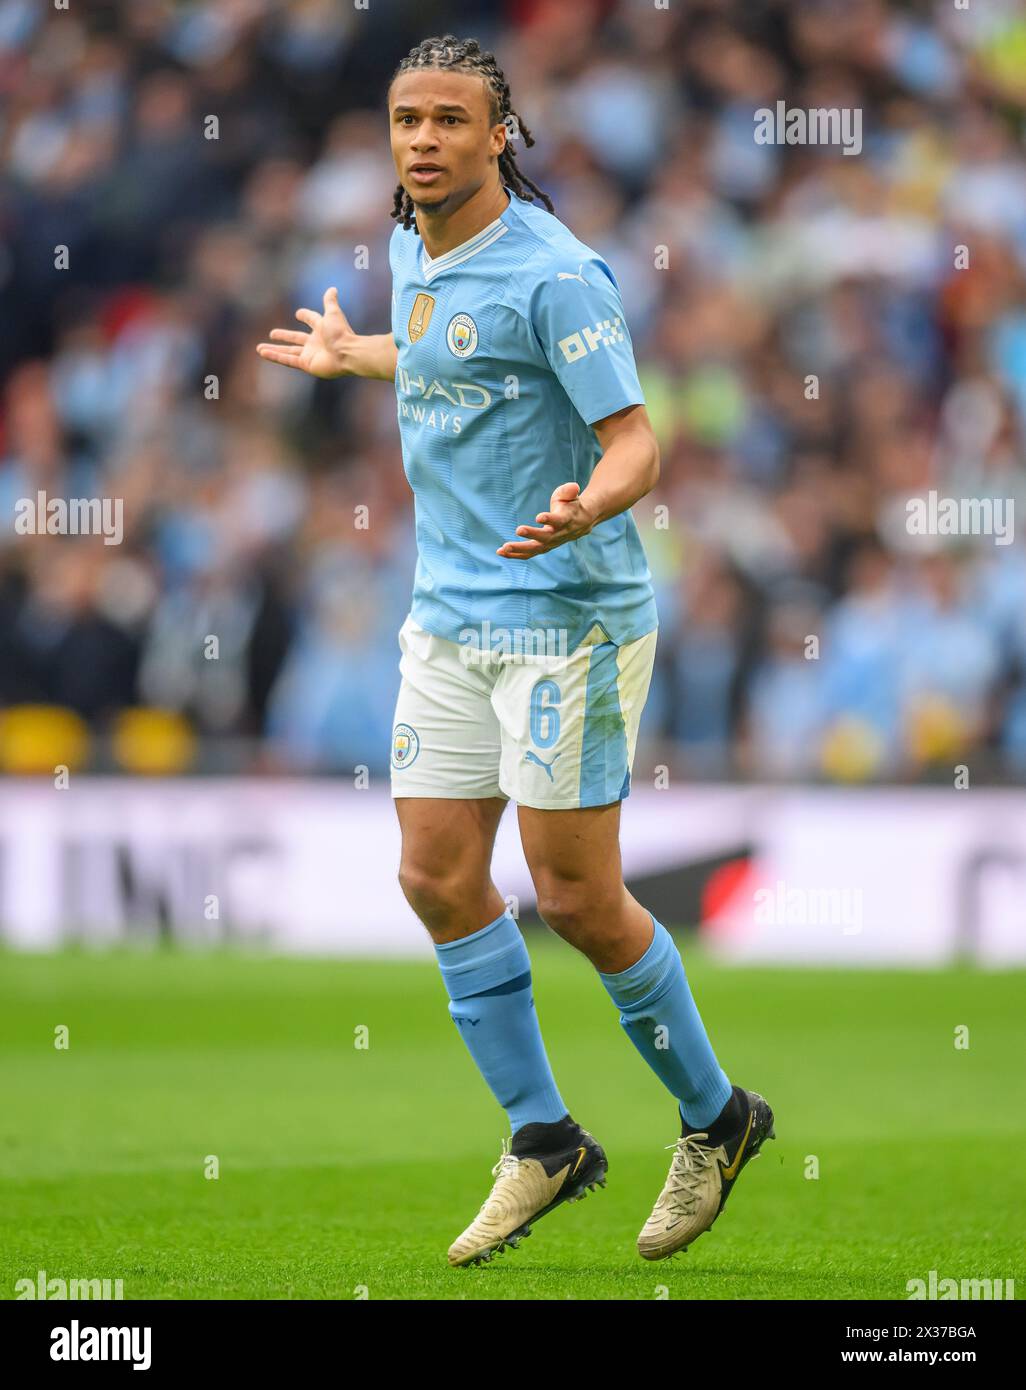 20 Apr 2024 - Manchester City v Chelsea - FA Cup Semi-Final - Wembley. Manchester City's Nathan Ake in action.  Picture : Mark Pain / Alamy Live News Stock Photo